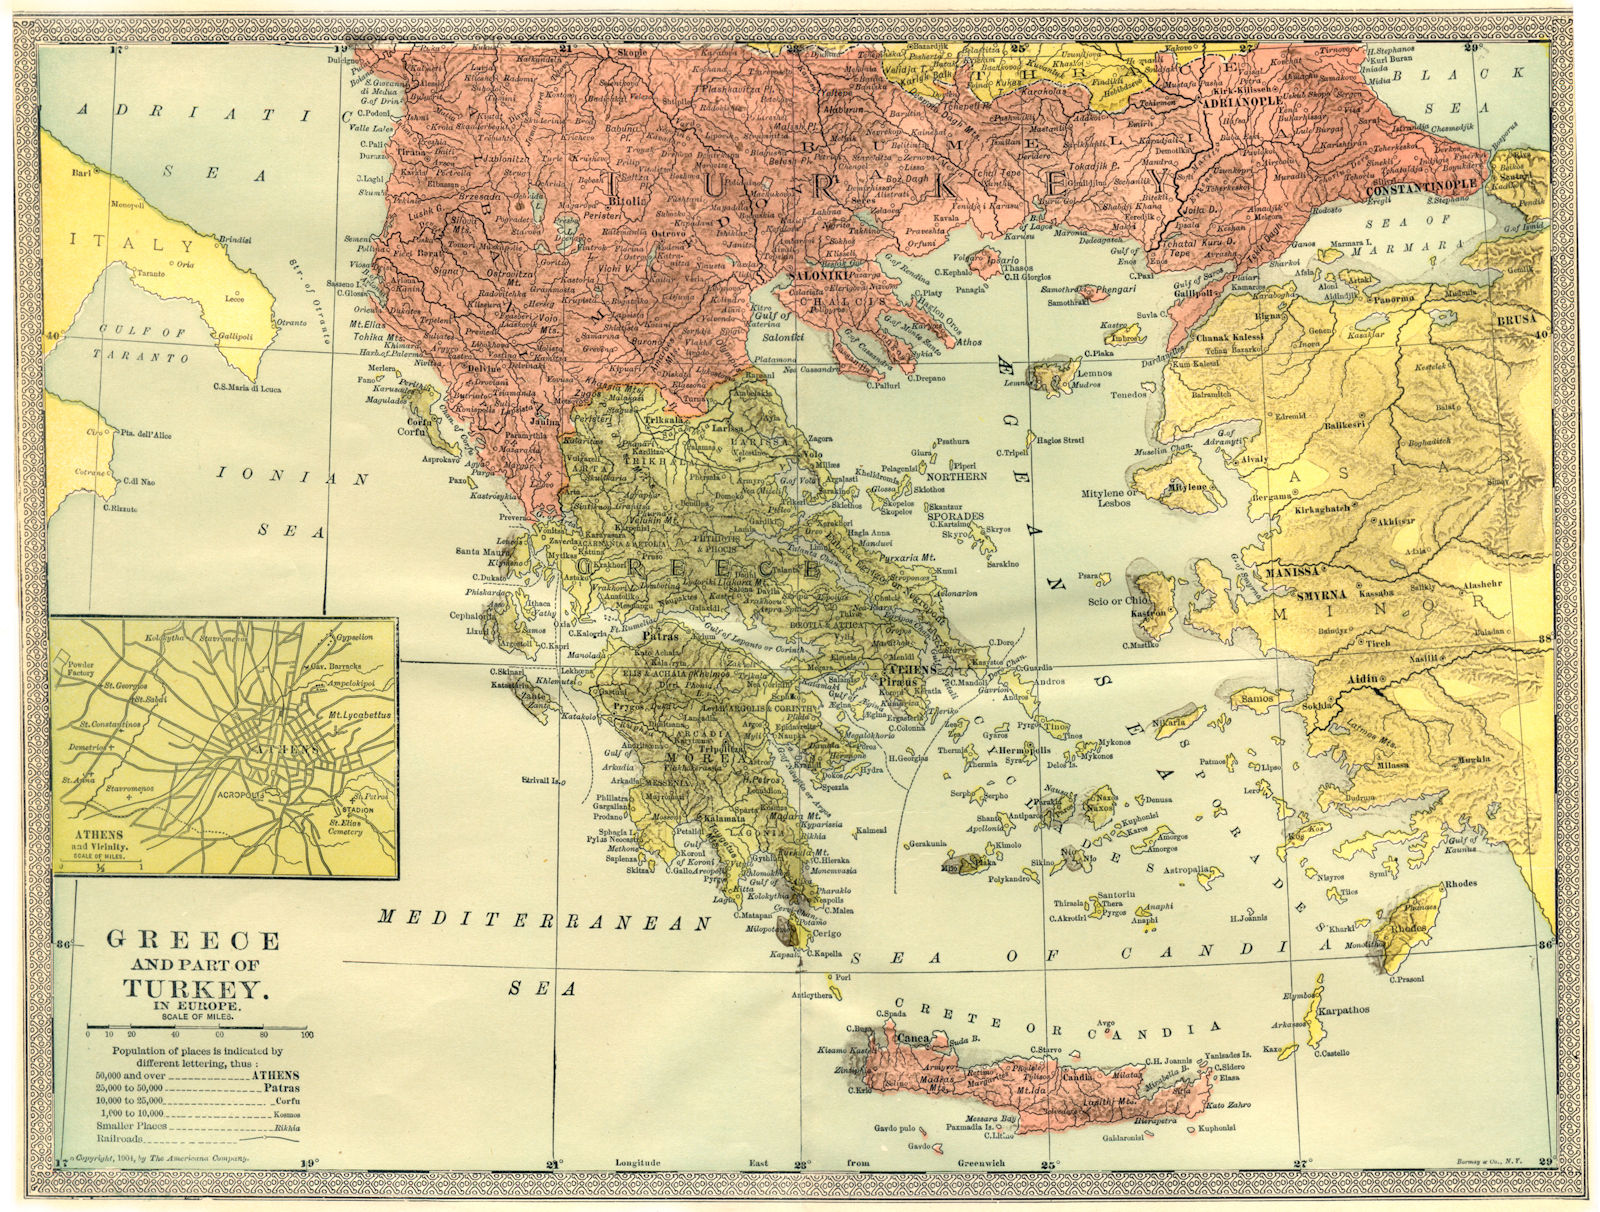 Associate Product 'Greece and part of Turkey in Europe'. Turkish Crete. Athens inset 1907 map